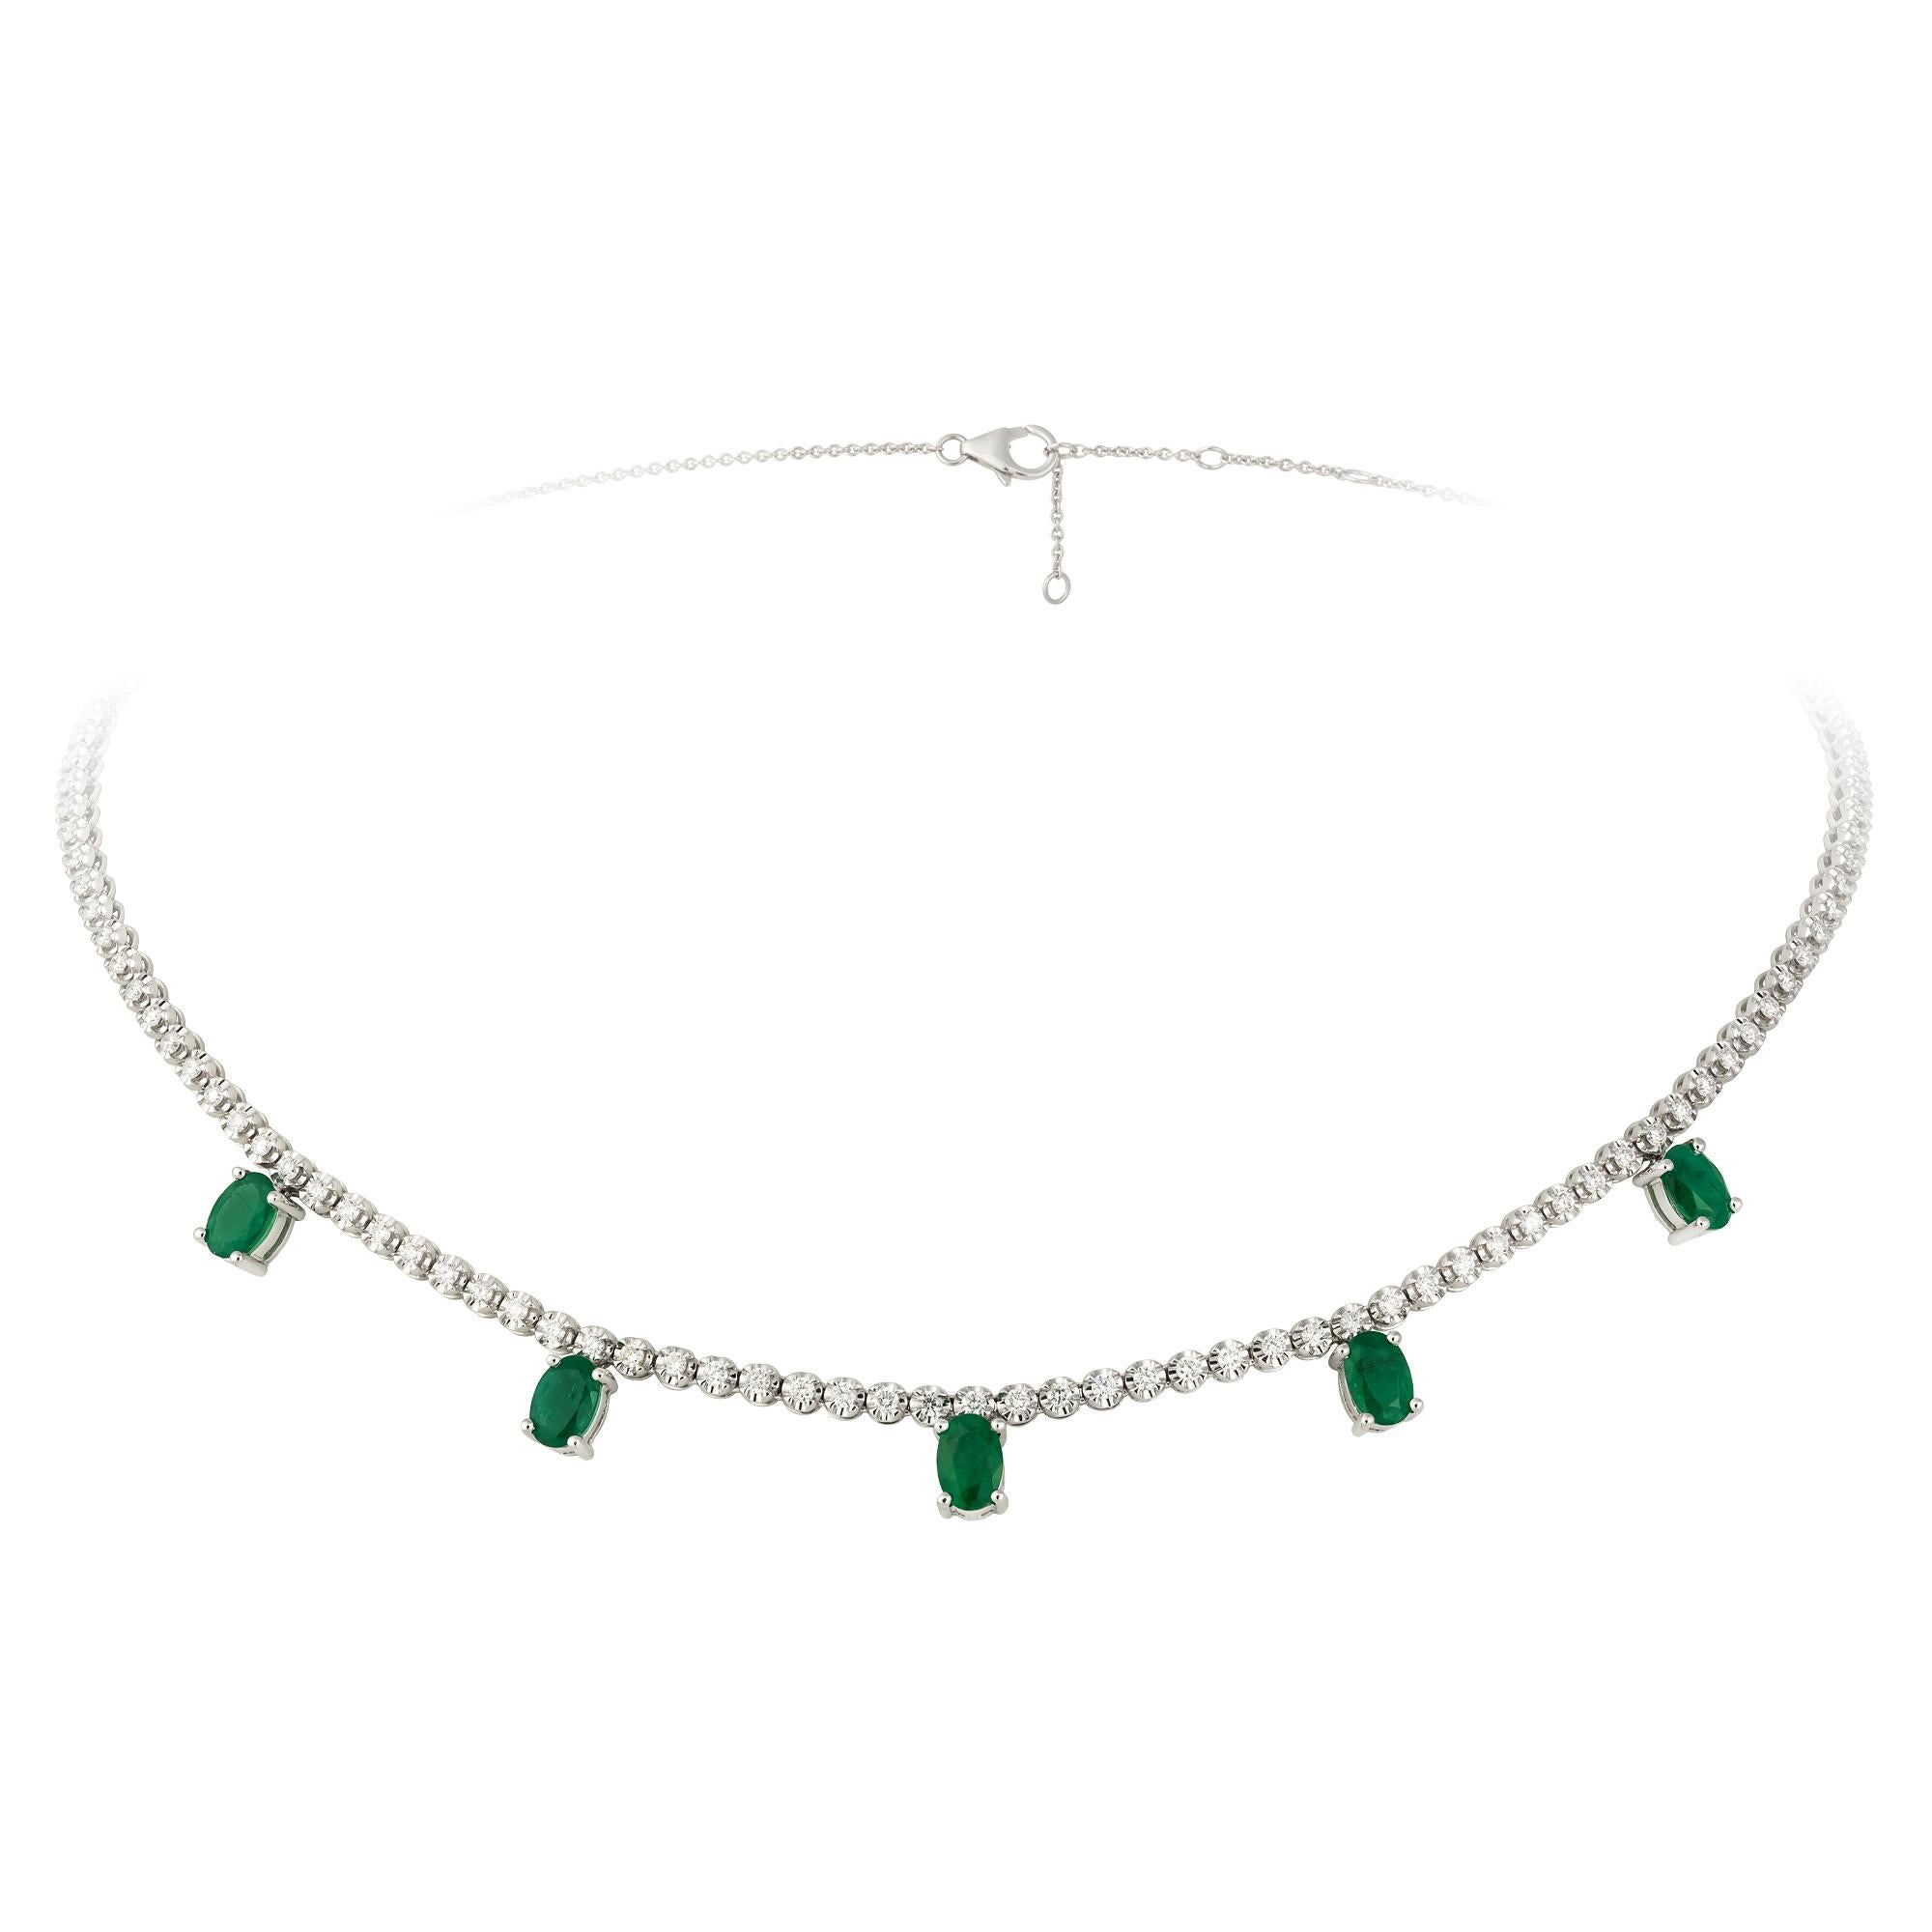 Antique Cushion Cut Fashionable Circle Emerald Diamond 18k White Gold Necklace Choker for Her